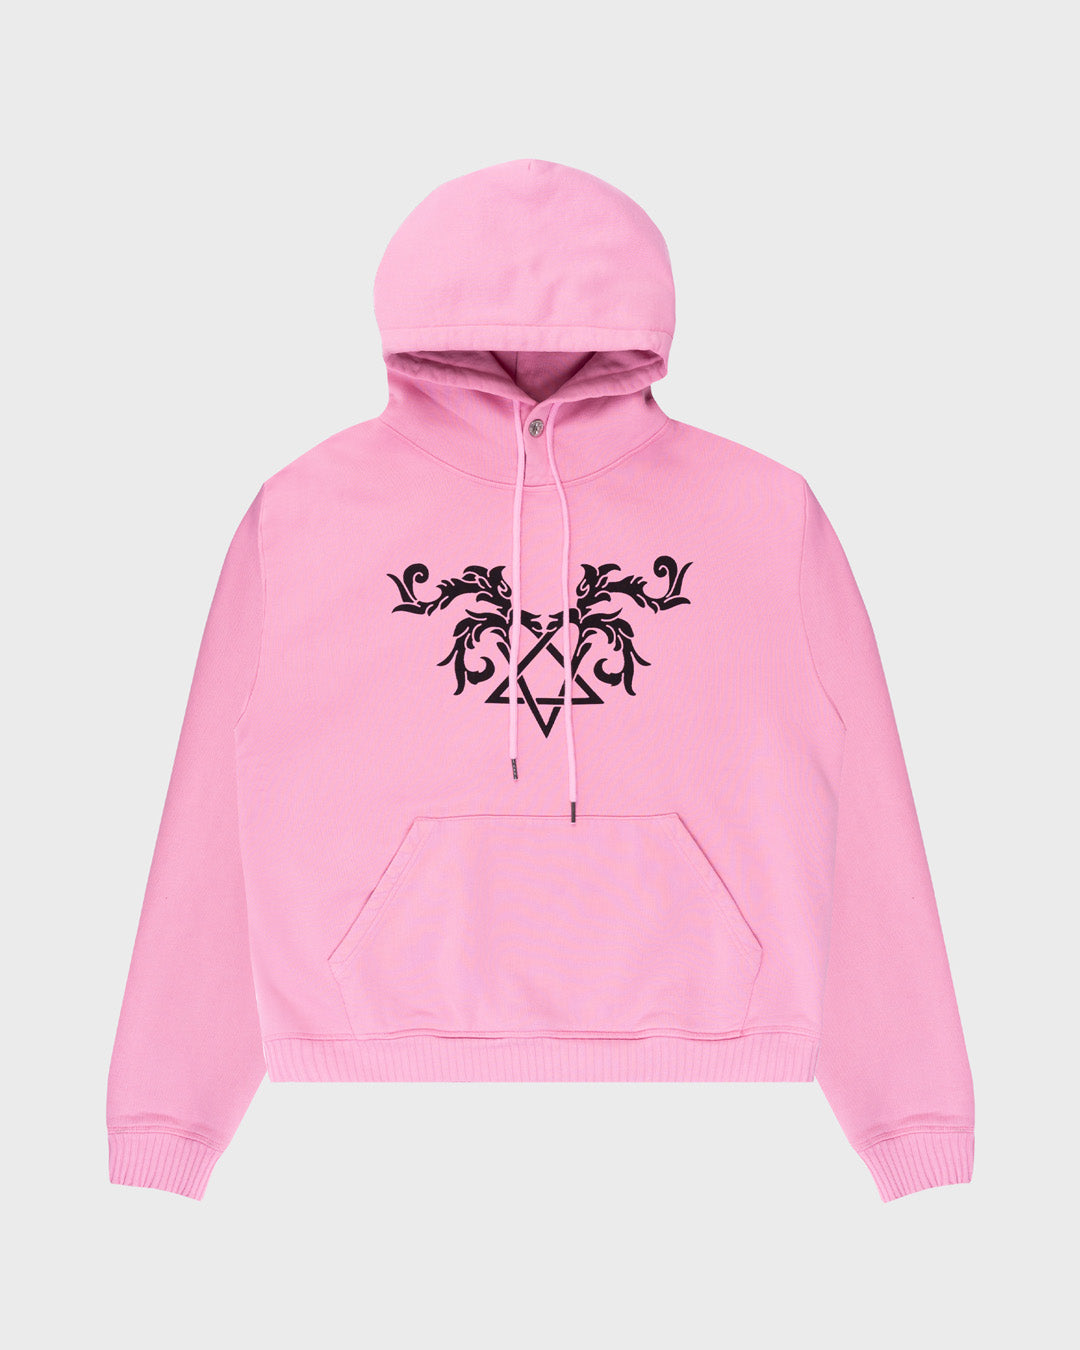 Heartagram Printemps Hoodie in Ballet. Front angle.